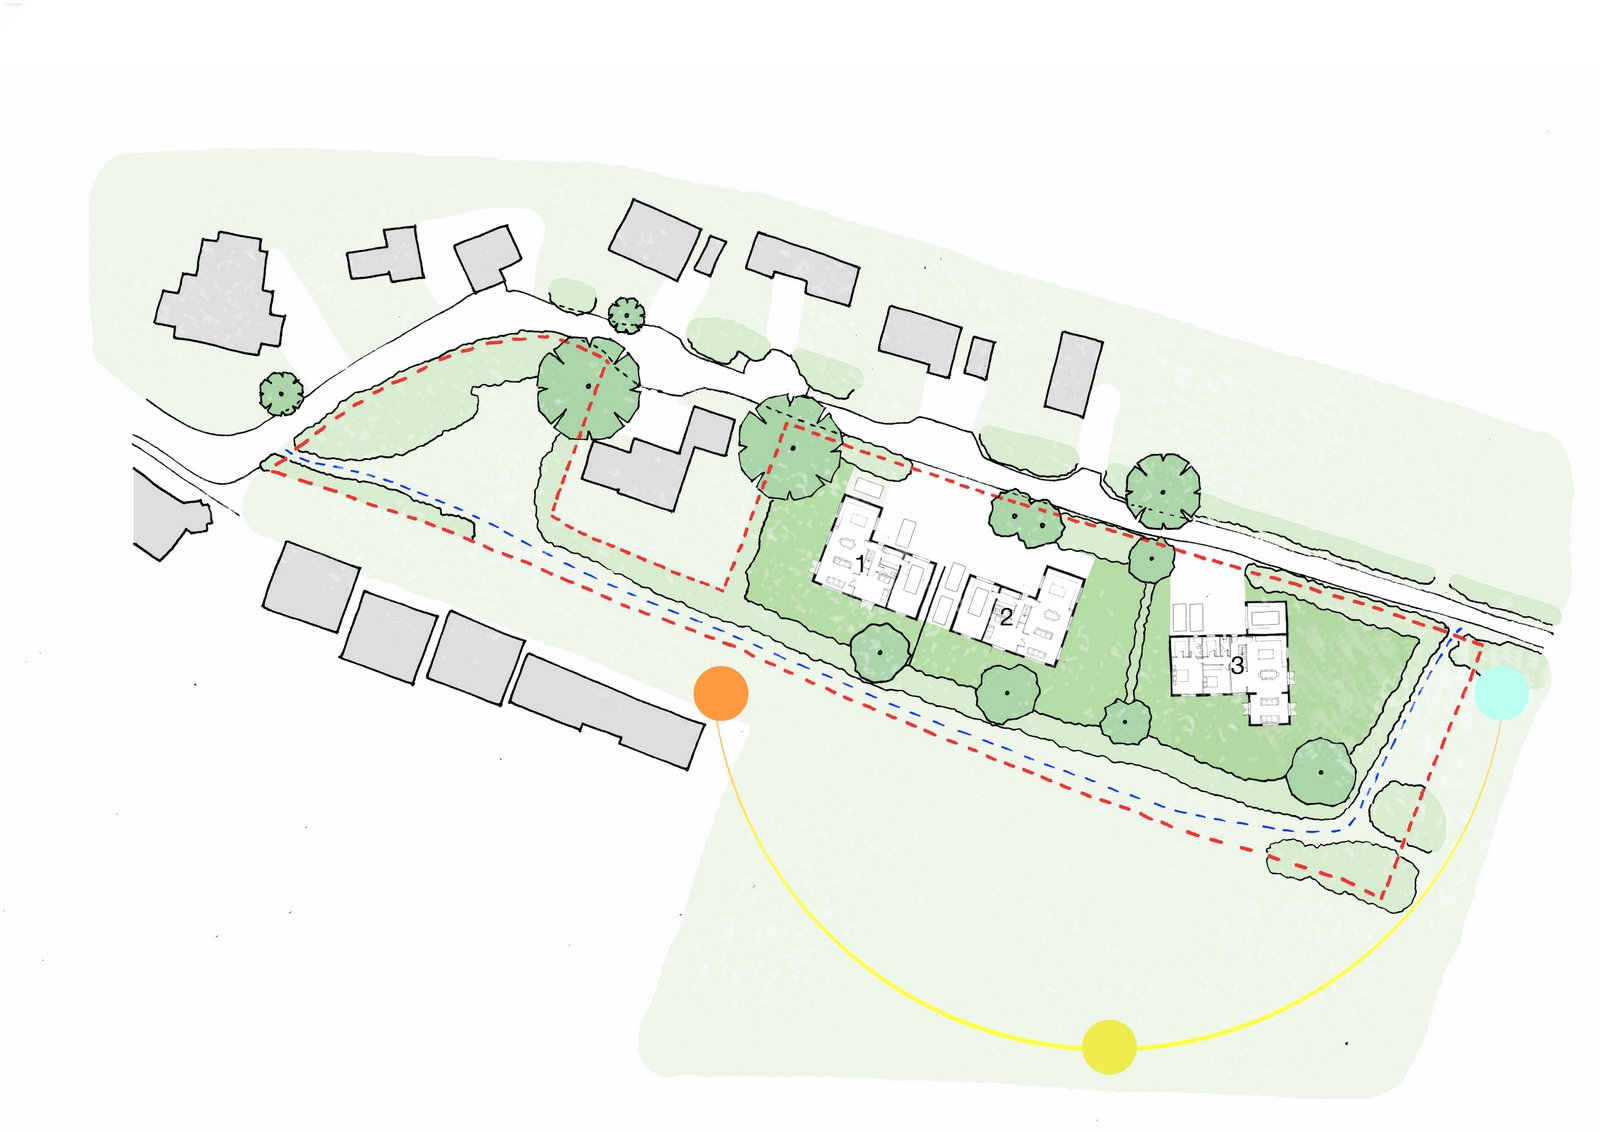 793_A01_SK001 Site plan 1-500 A3 REVISED.jpg